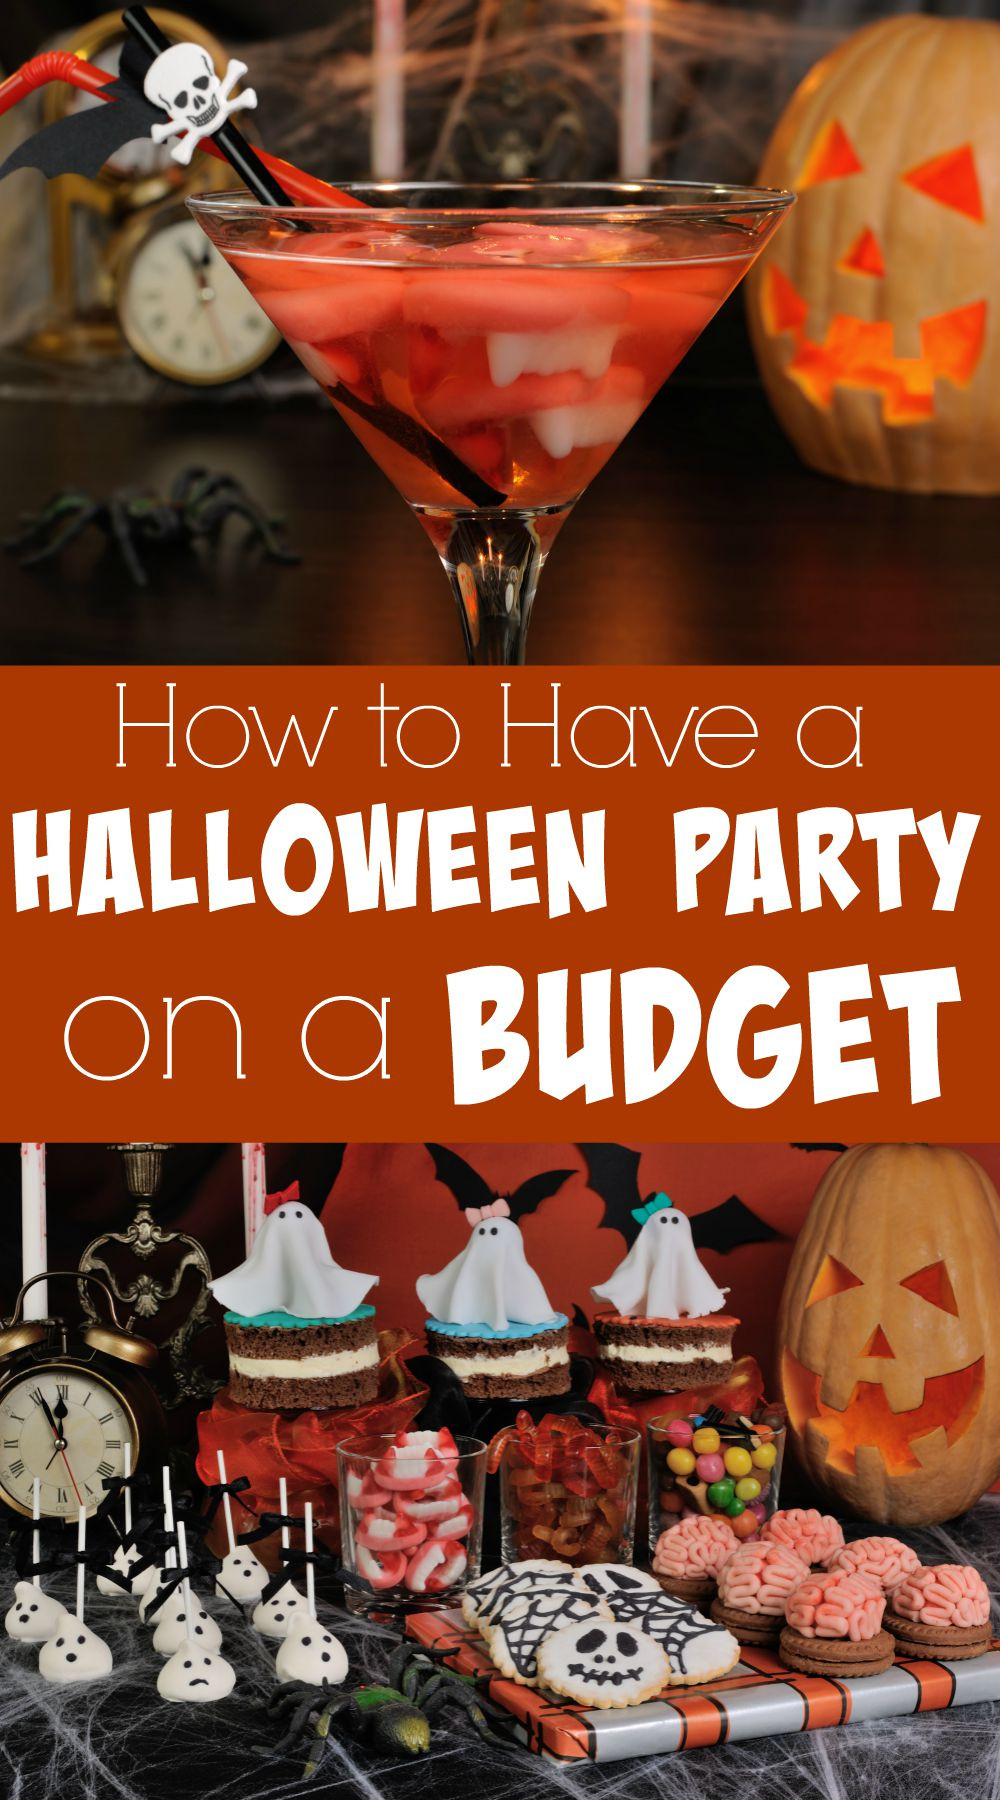 Halloween Theme Party Ideas For Adults
 Halloween Party on a Bud